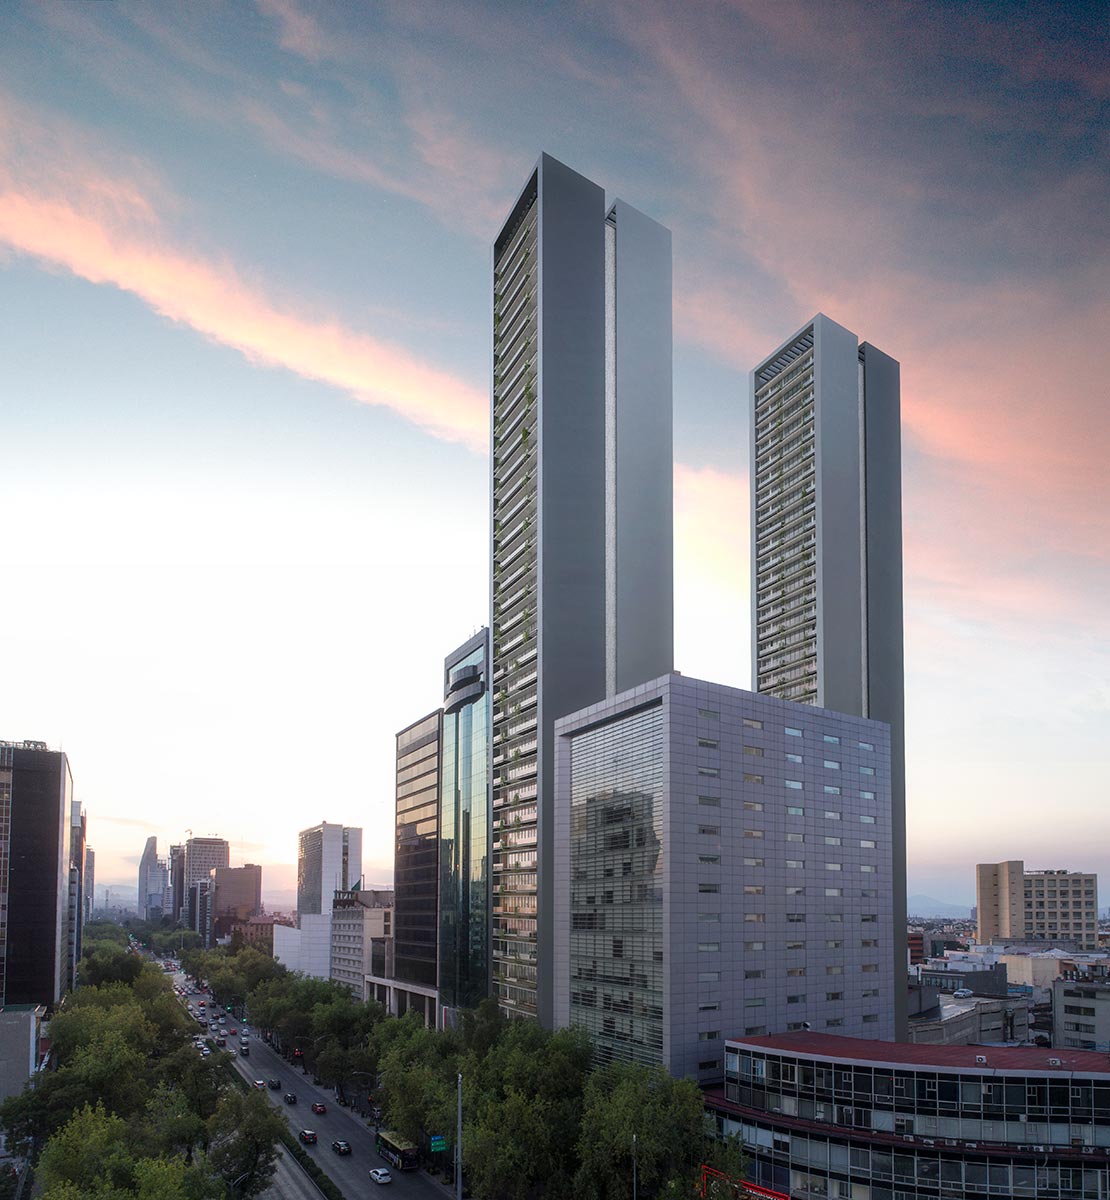 Reforma 95 Residential Towers, 2018